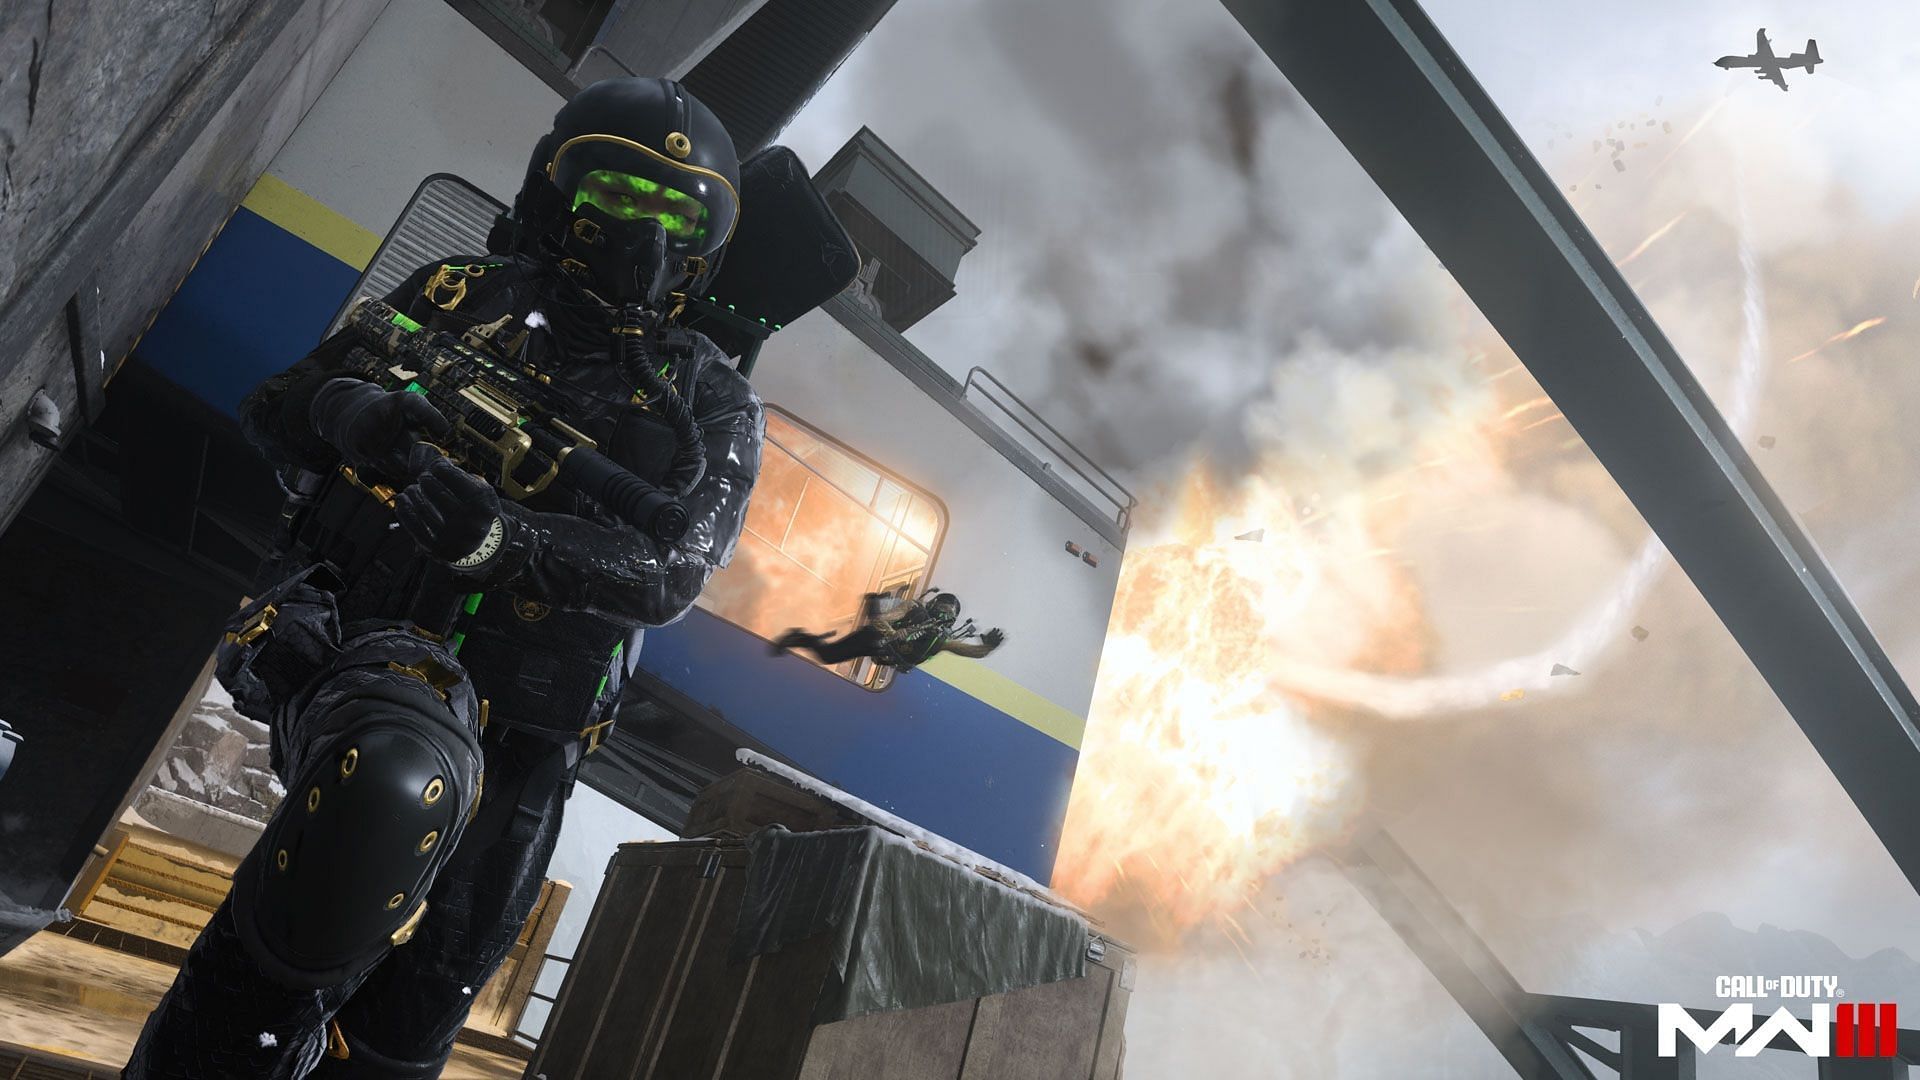 DNA Bomb will be introduced in Modern Warfare 3 with Season 4 update